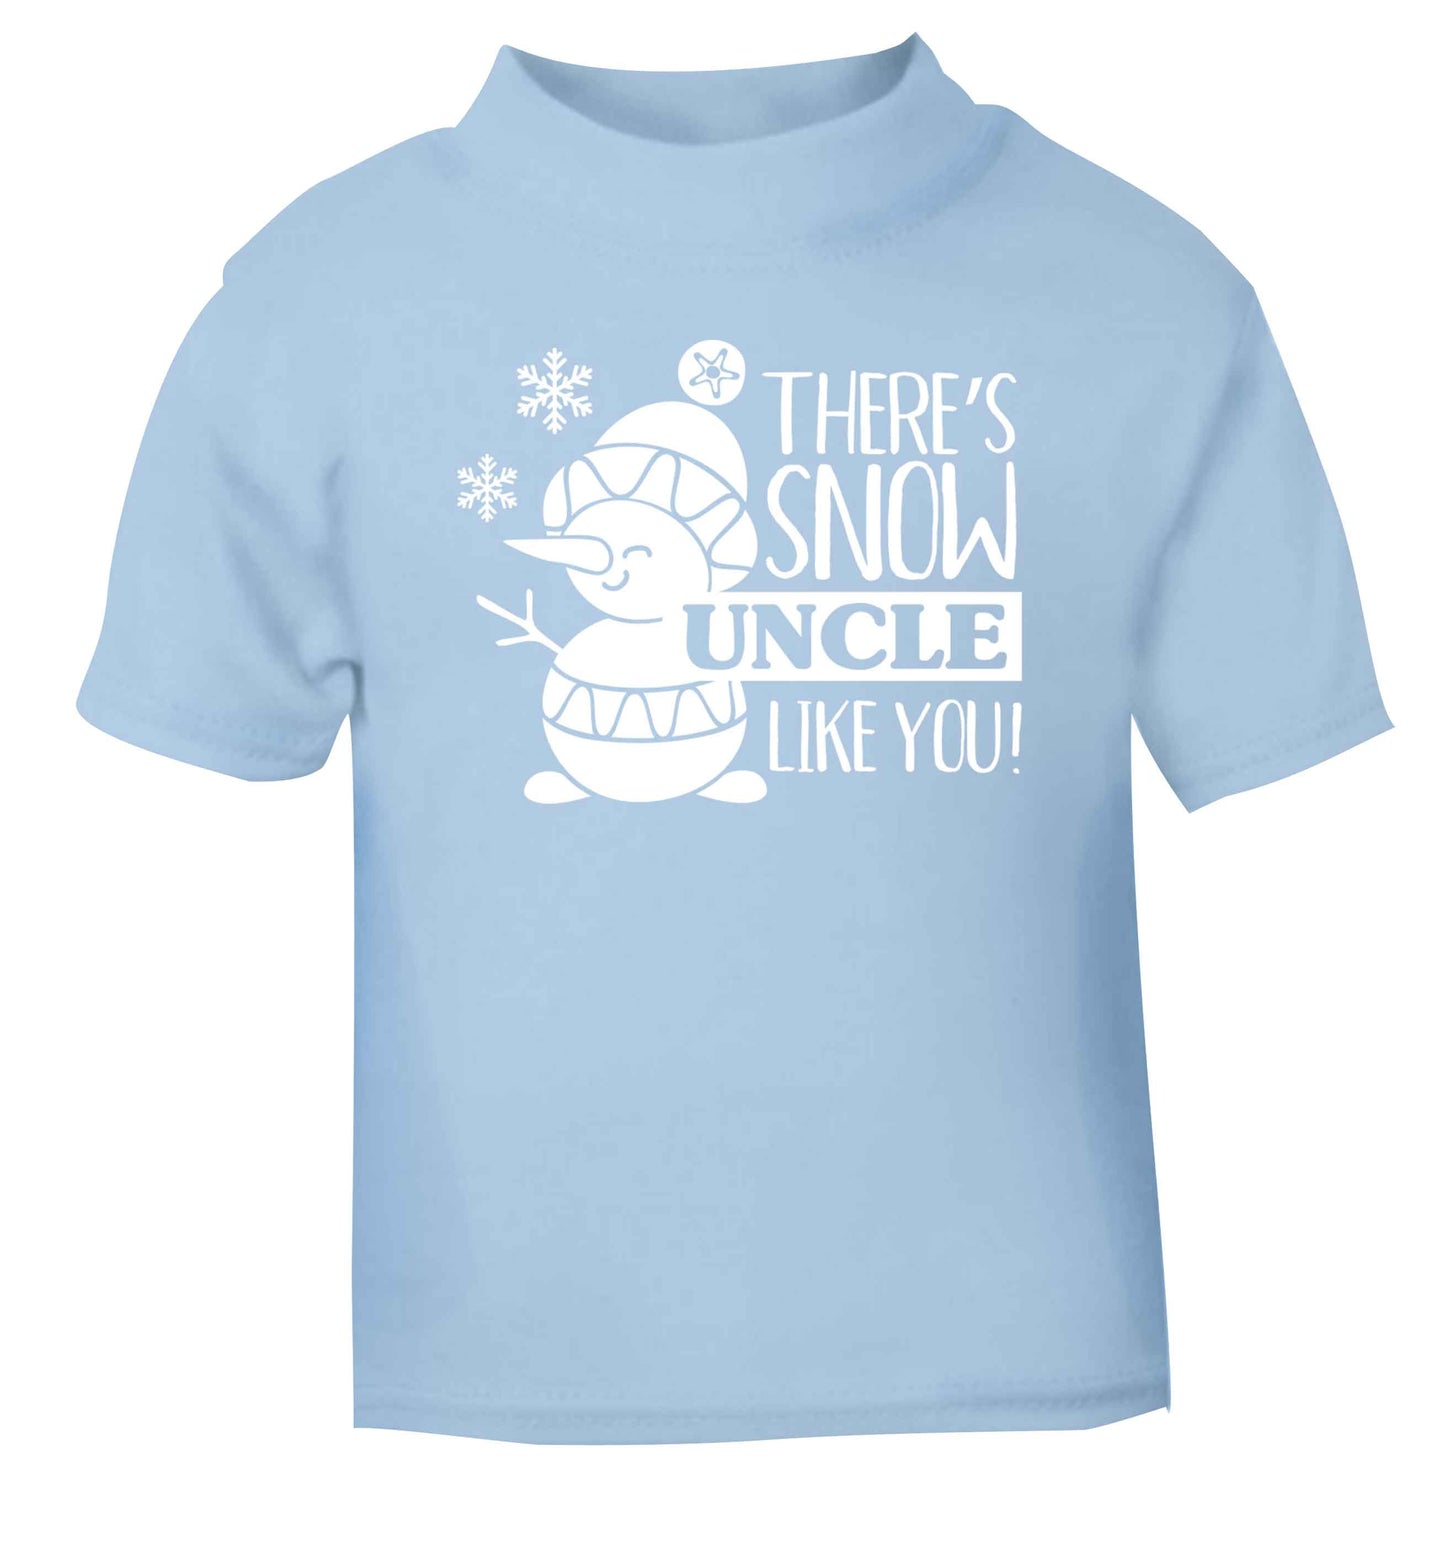 There's snow uncle like you light blue baby toddler Tshirt 2 Years